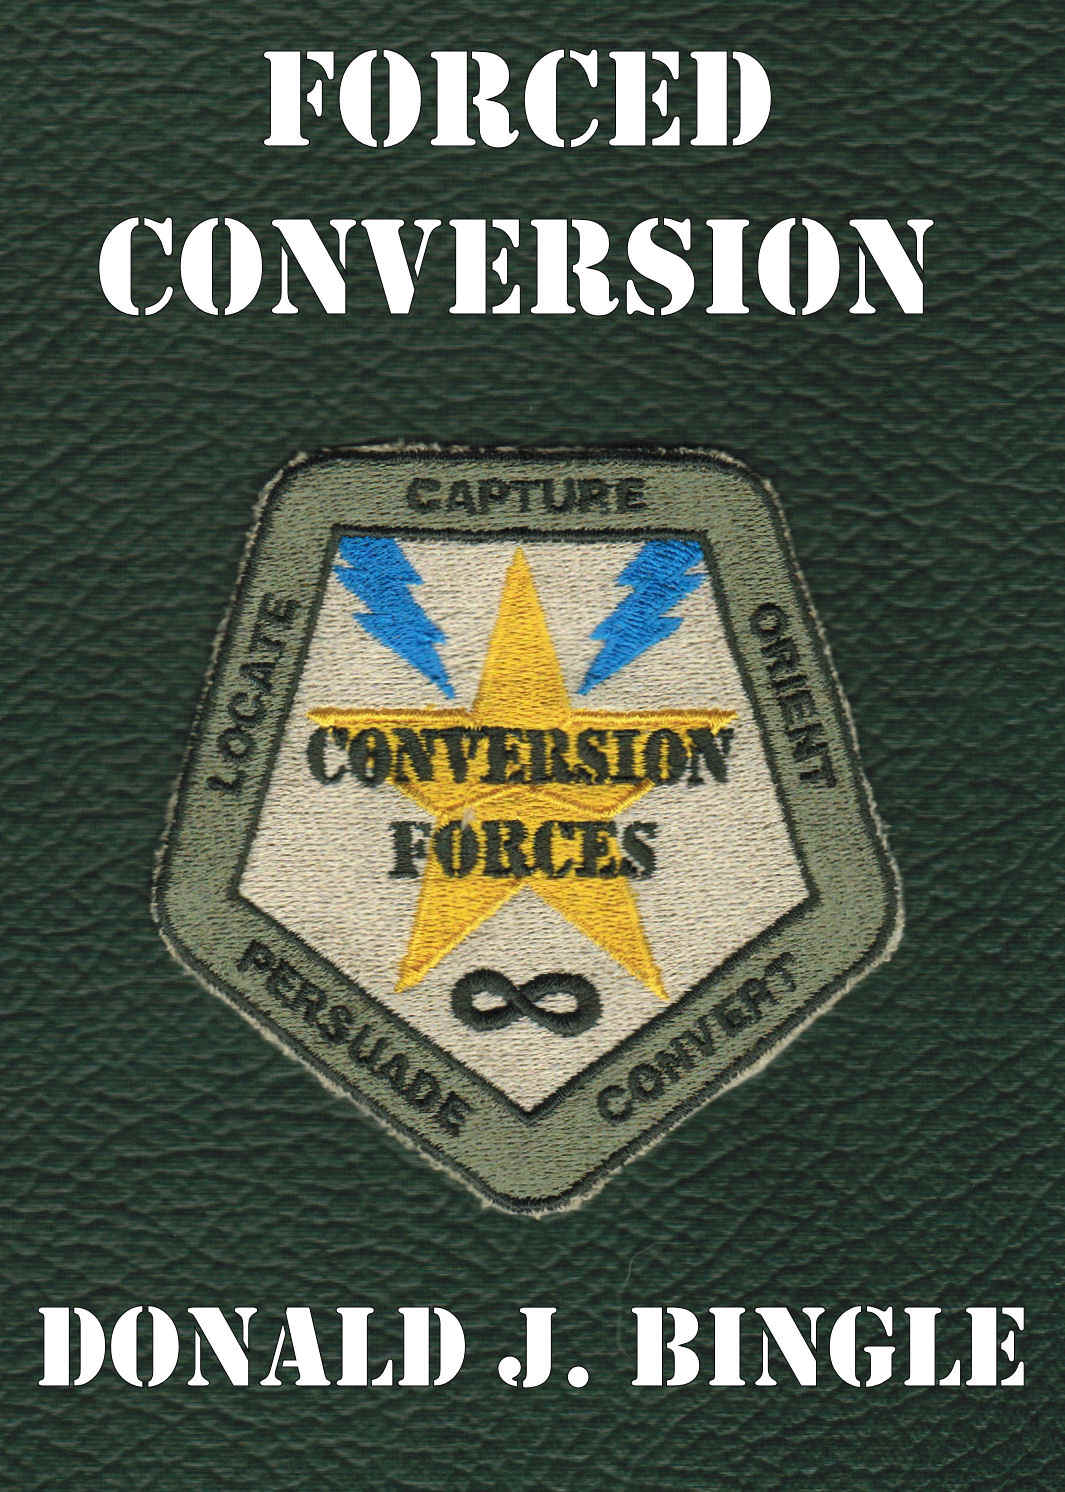 Forced_Conversion_Rescanned_Cover.jpg (402945 bytes)